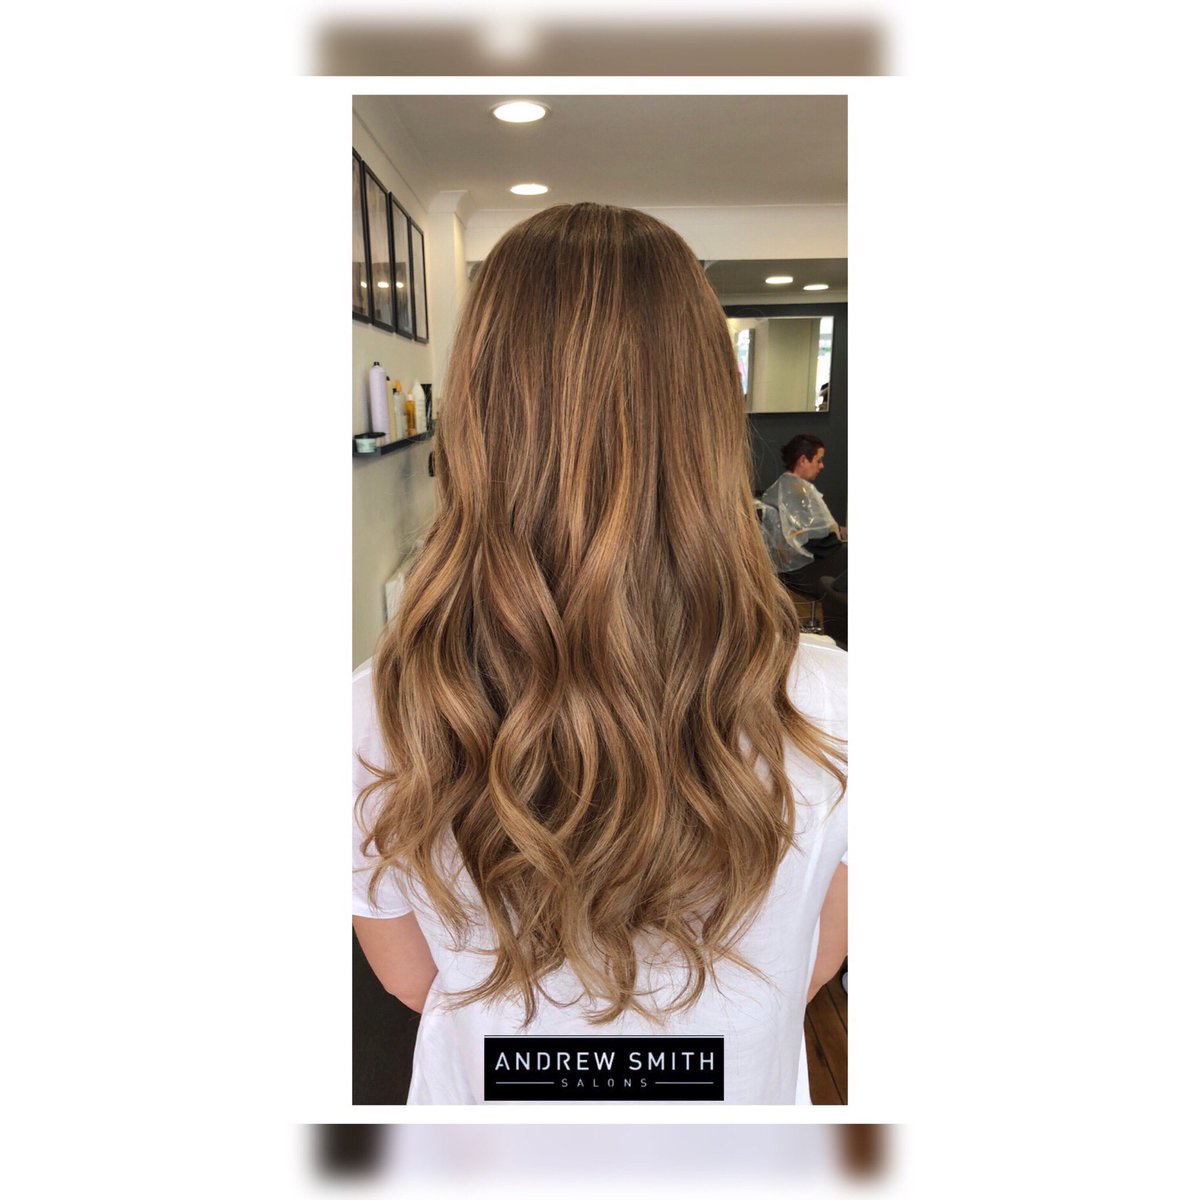 We’re in love with this natural  #superbalayage and #lazywaves created by Andrew at Fareham 💕 .
.
.
.
.
.
.
.
 #milkshakehairuk #wonderful_lifephbs #goodsalonguide  #beautifulhair #wavyhair #longhair #balayage #haircolour #colourtransformation